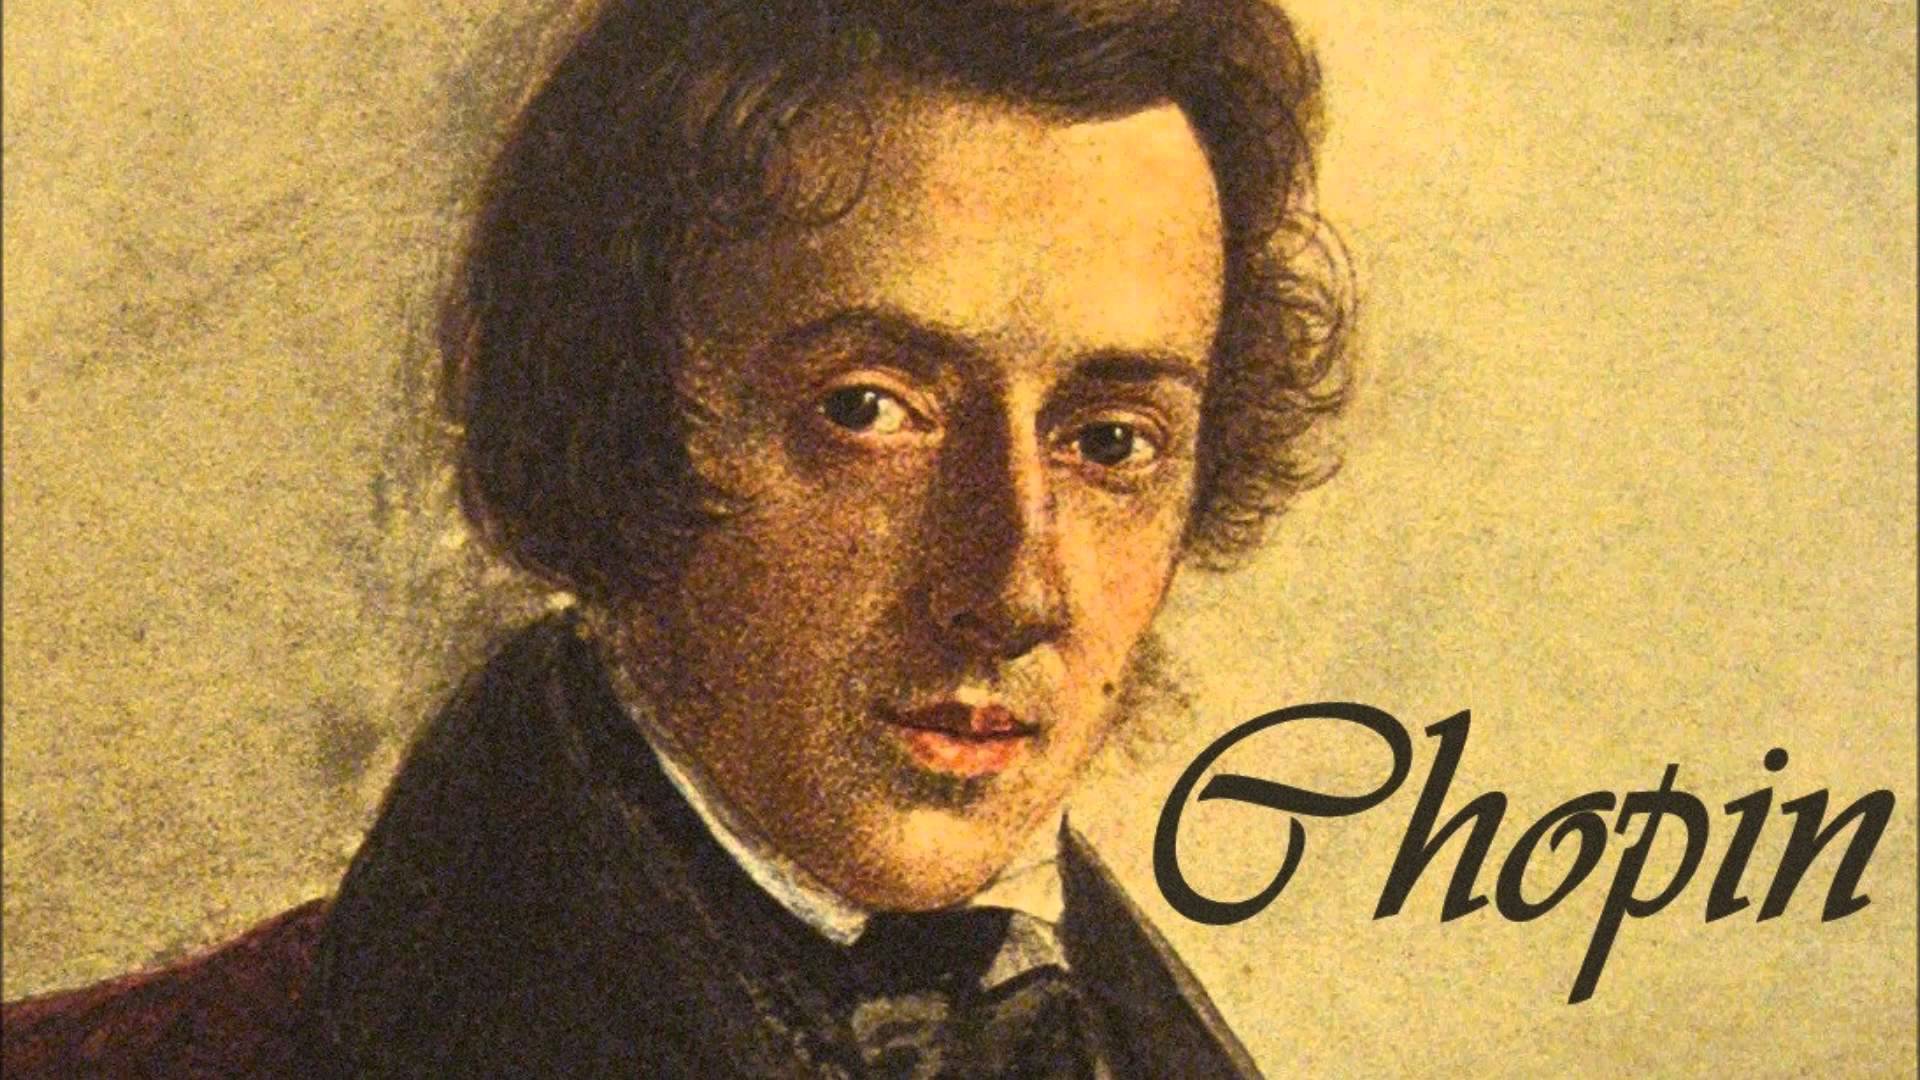 Friday Music Fr D Ric Chopin Men Of The West